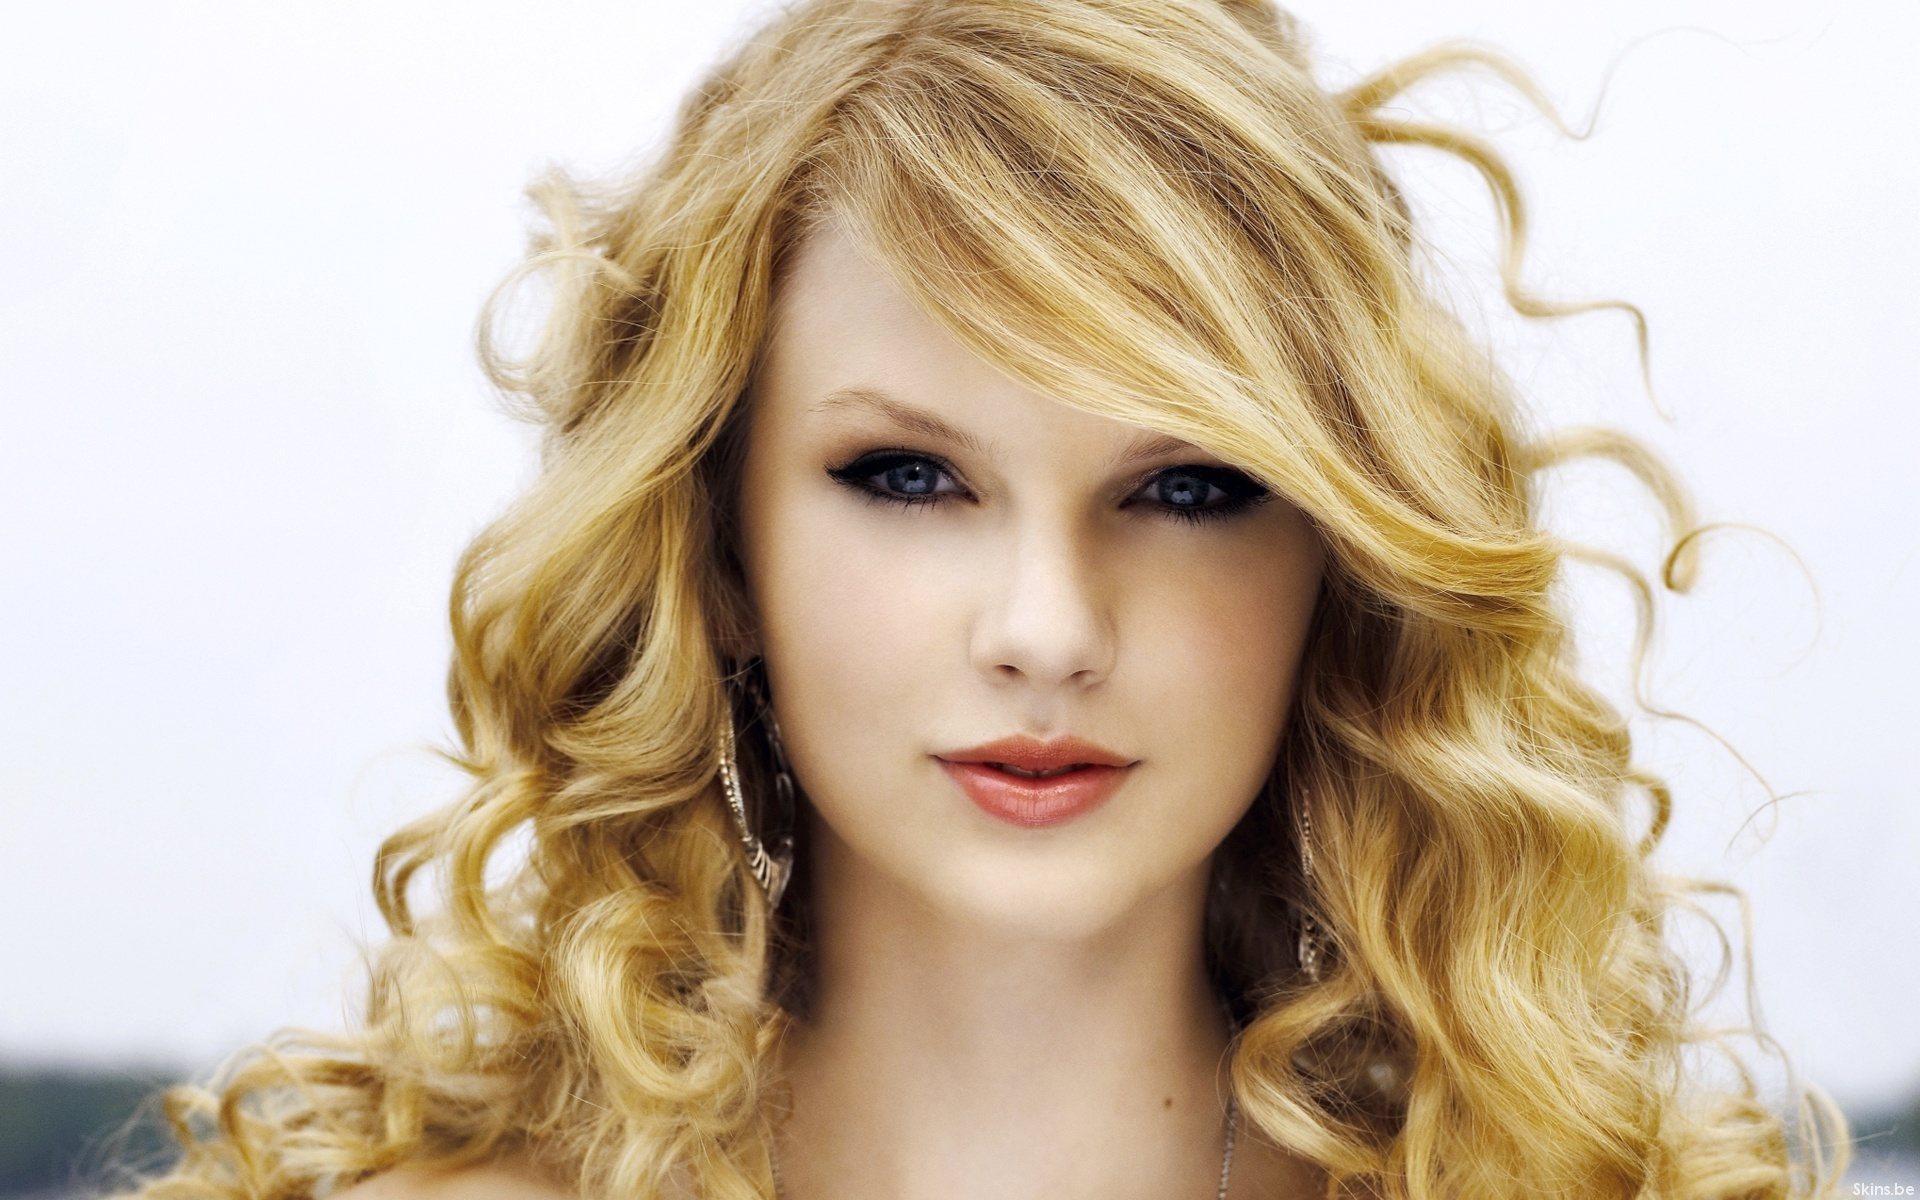 2013 Taylor Swift Blonde Hair wallpapers55.com - Best Wallpapers